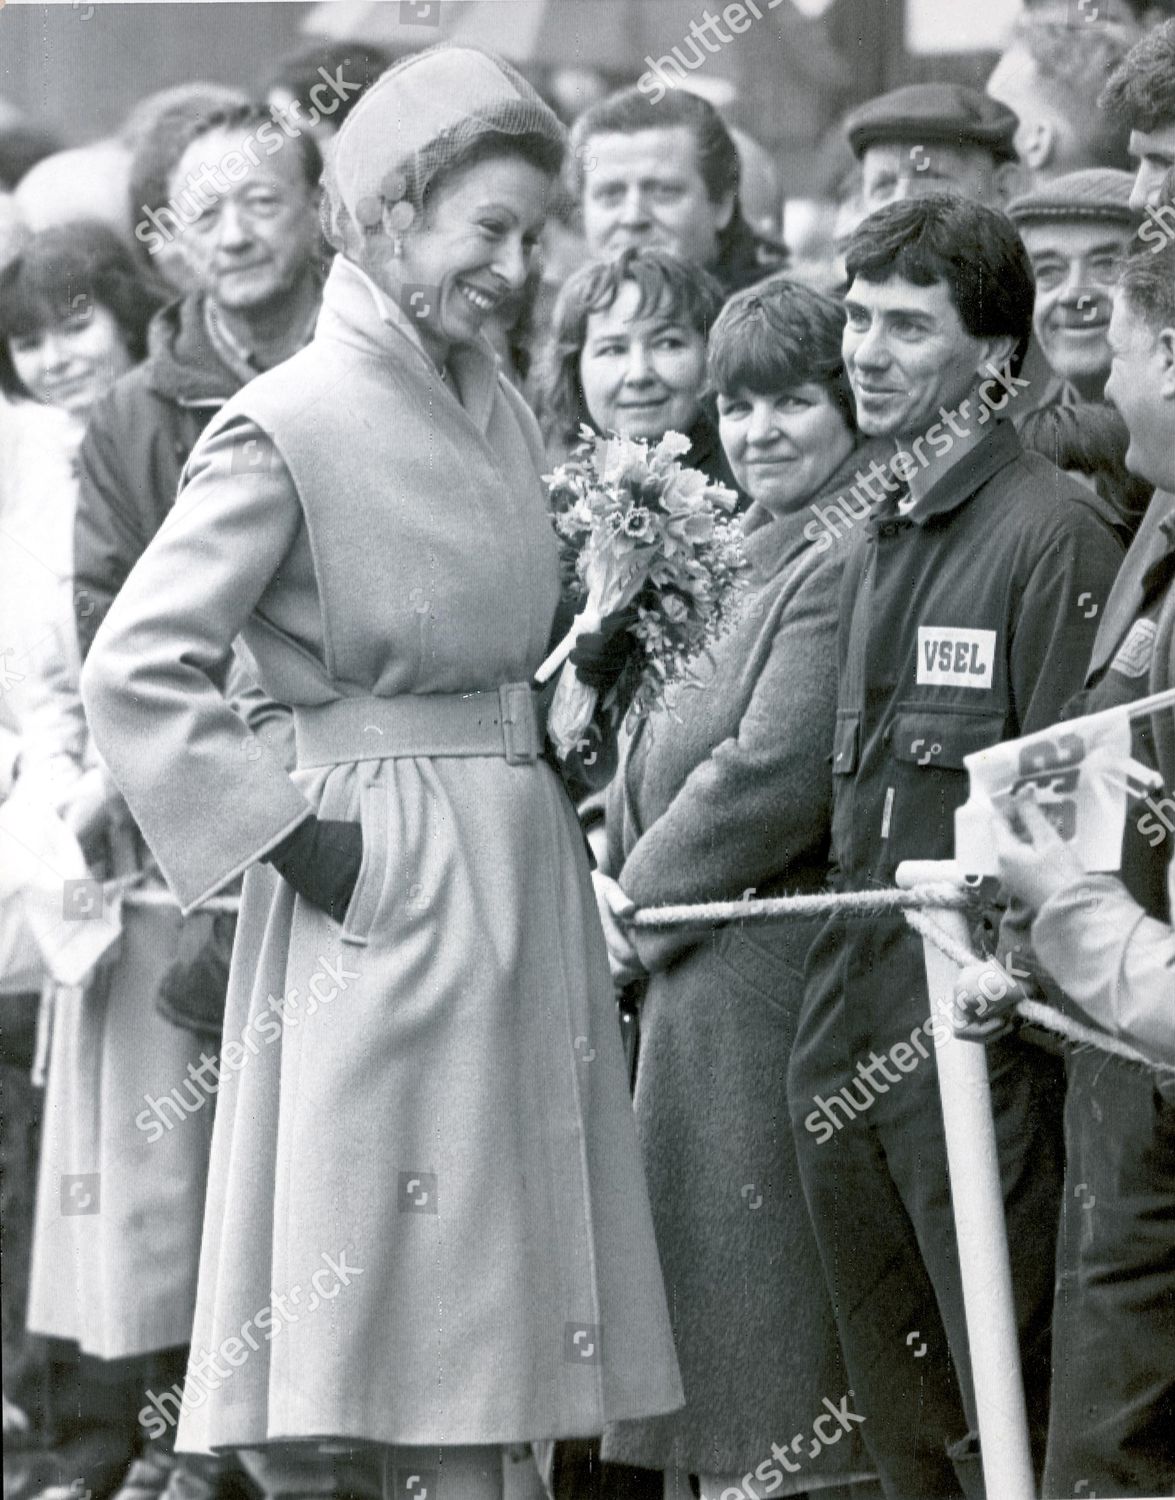 princess-anne-now-princess-royal-1988-picture-shows-princess-royal-in-a-happy-and-relaxed-mood-as-she-jokes-with-the-crowd-after-launching-the-sub-hms-talent-shutterstock-editorial-8993328a.jpg